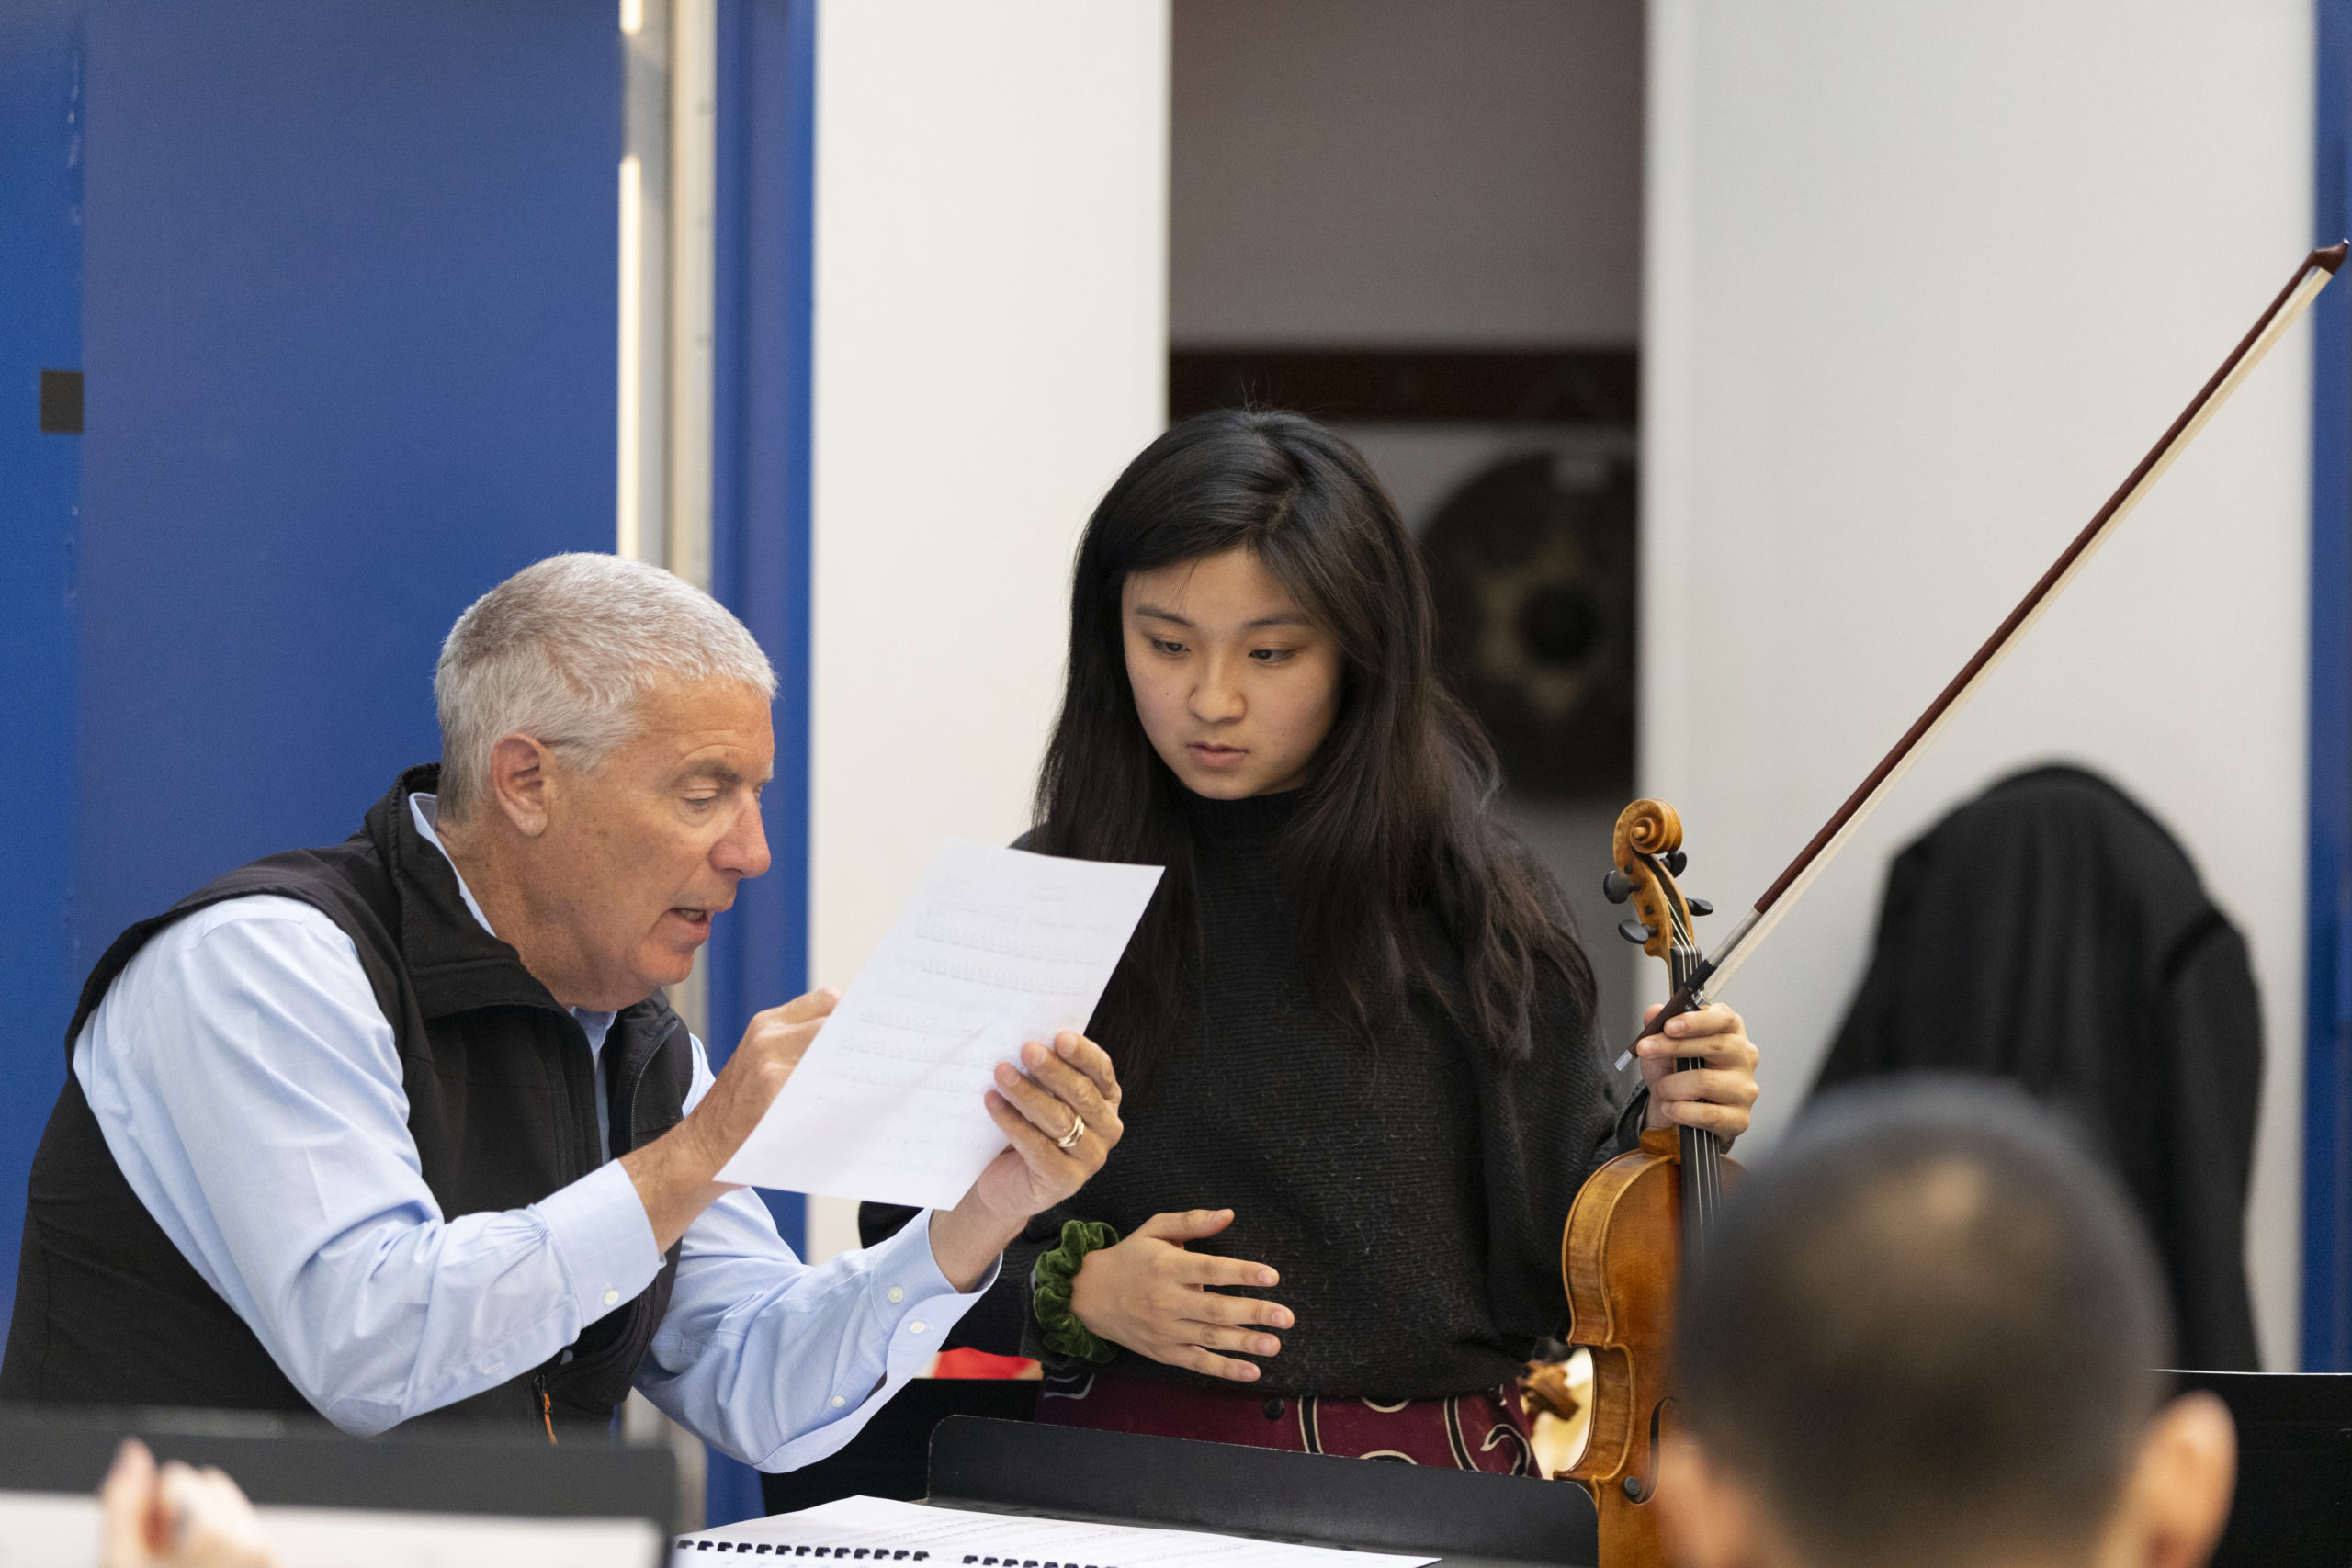 A music student speaking with a professor.